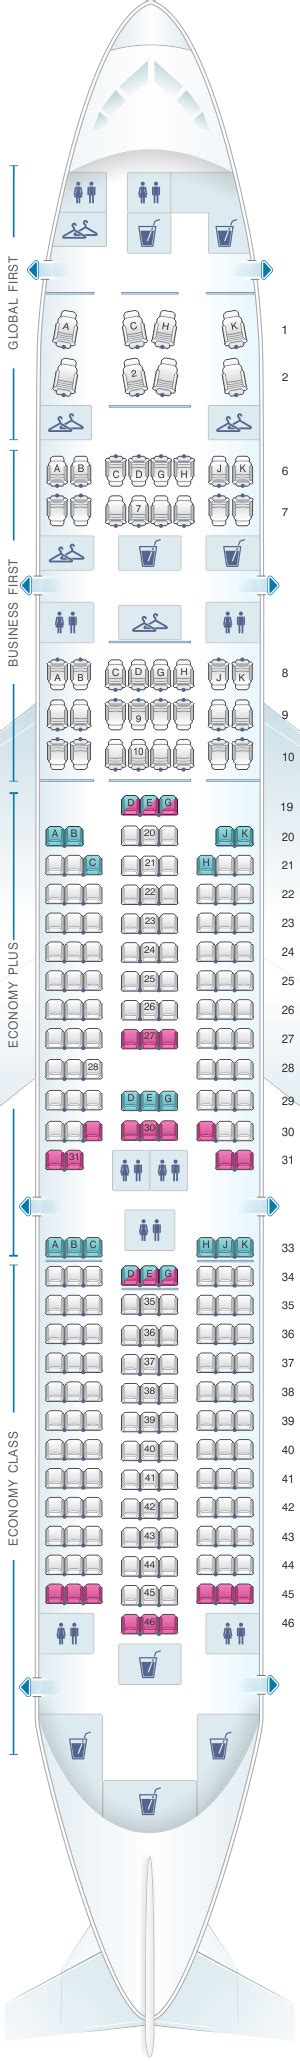 Standard Economy (Rows 8-32) View map. Boeing 737-700 (737) Domestic Layout 2. Recliner Business (Rows 1-3) Standard Economy Plus (Rows 7-10, 21-23) Standard Economy (Rows 11-15, 24-34) Viewing. For your next United flight, use this seating chart to get the most comfortable seats, legroom, and recline on .. 